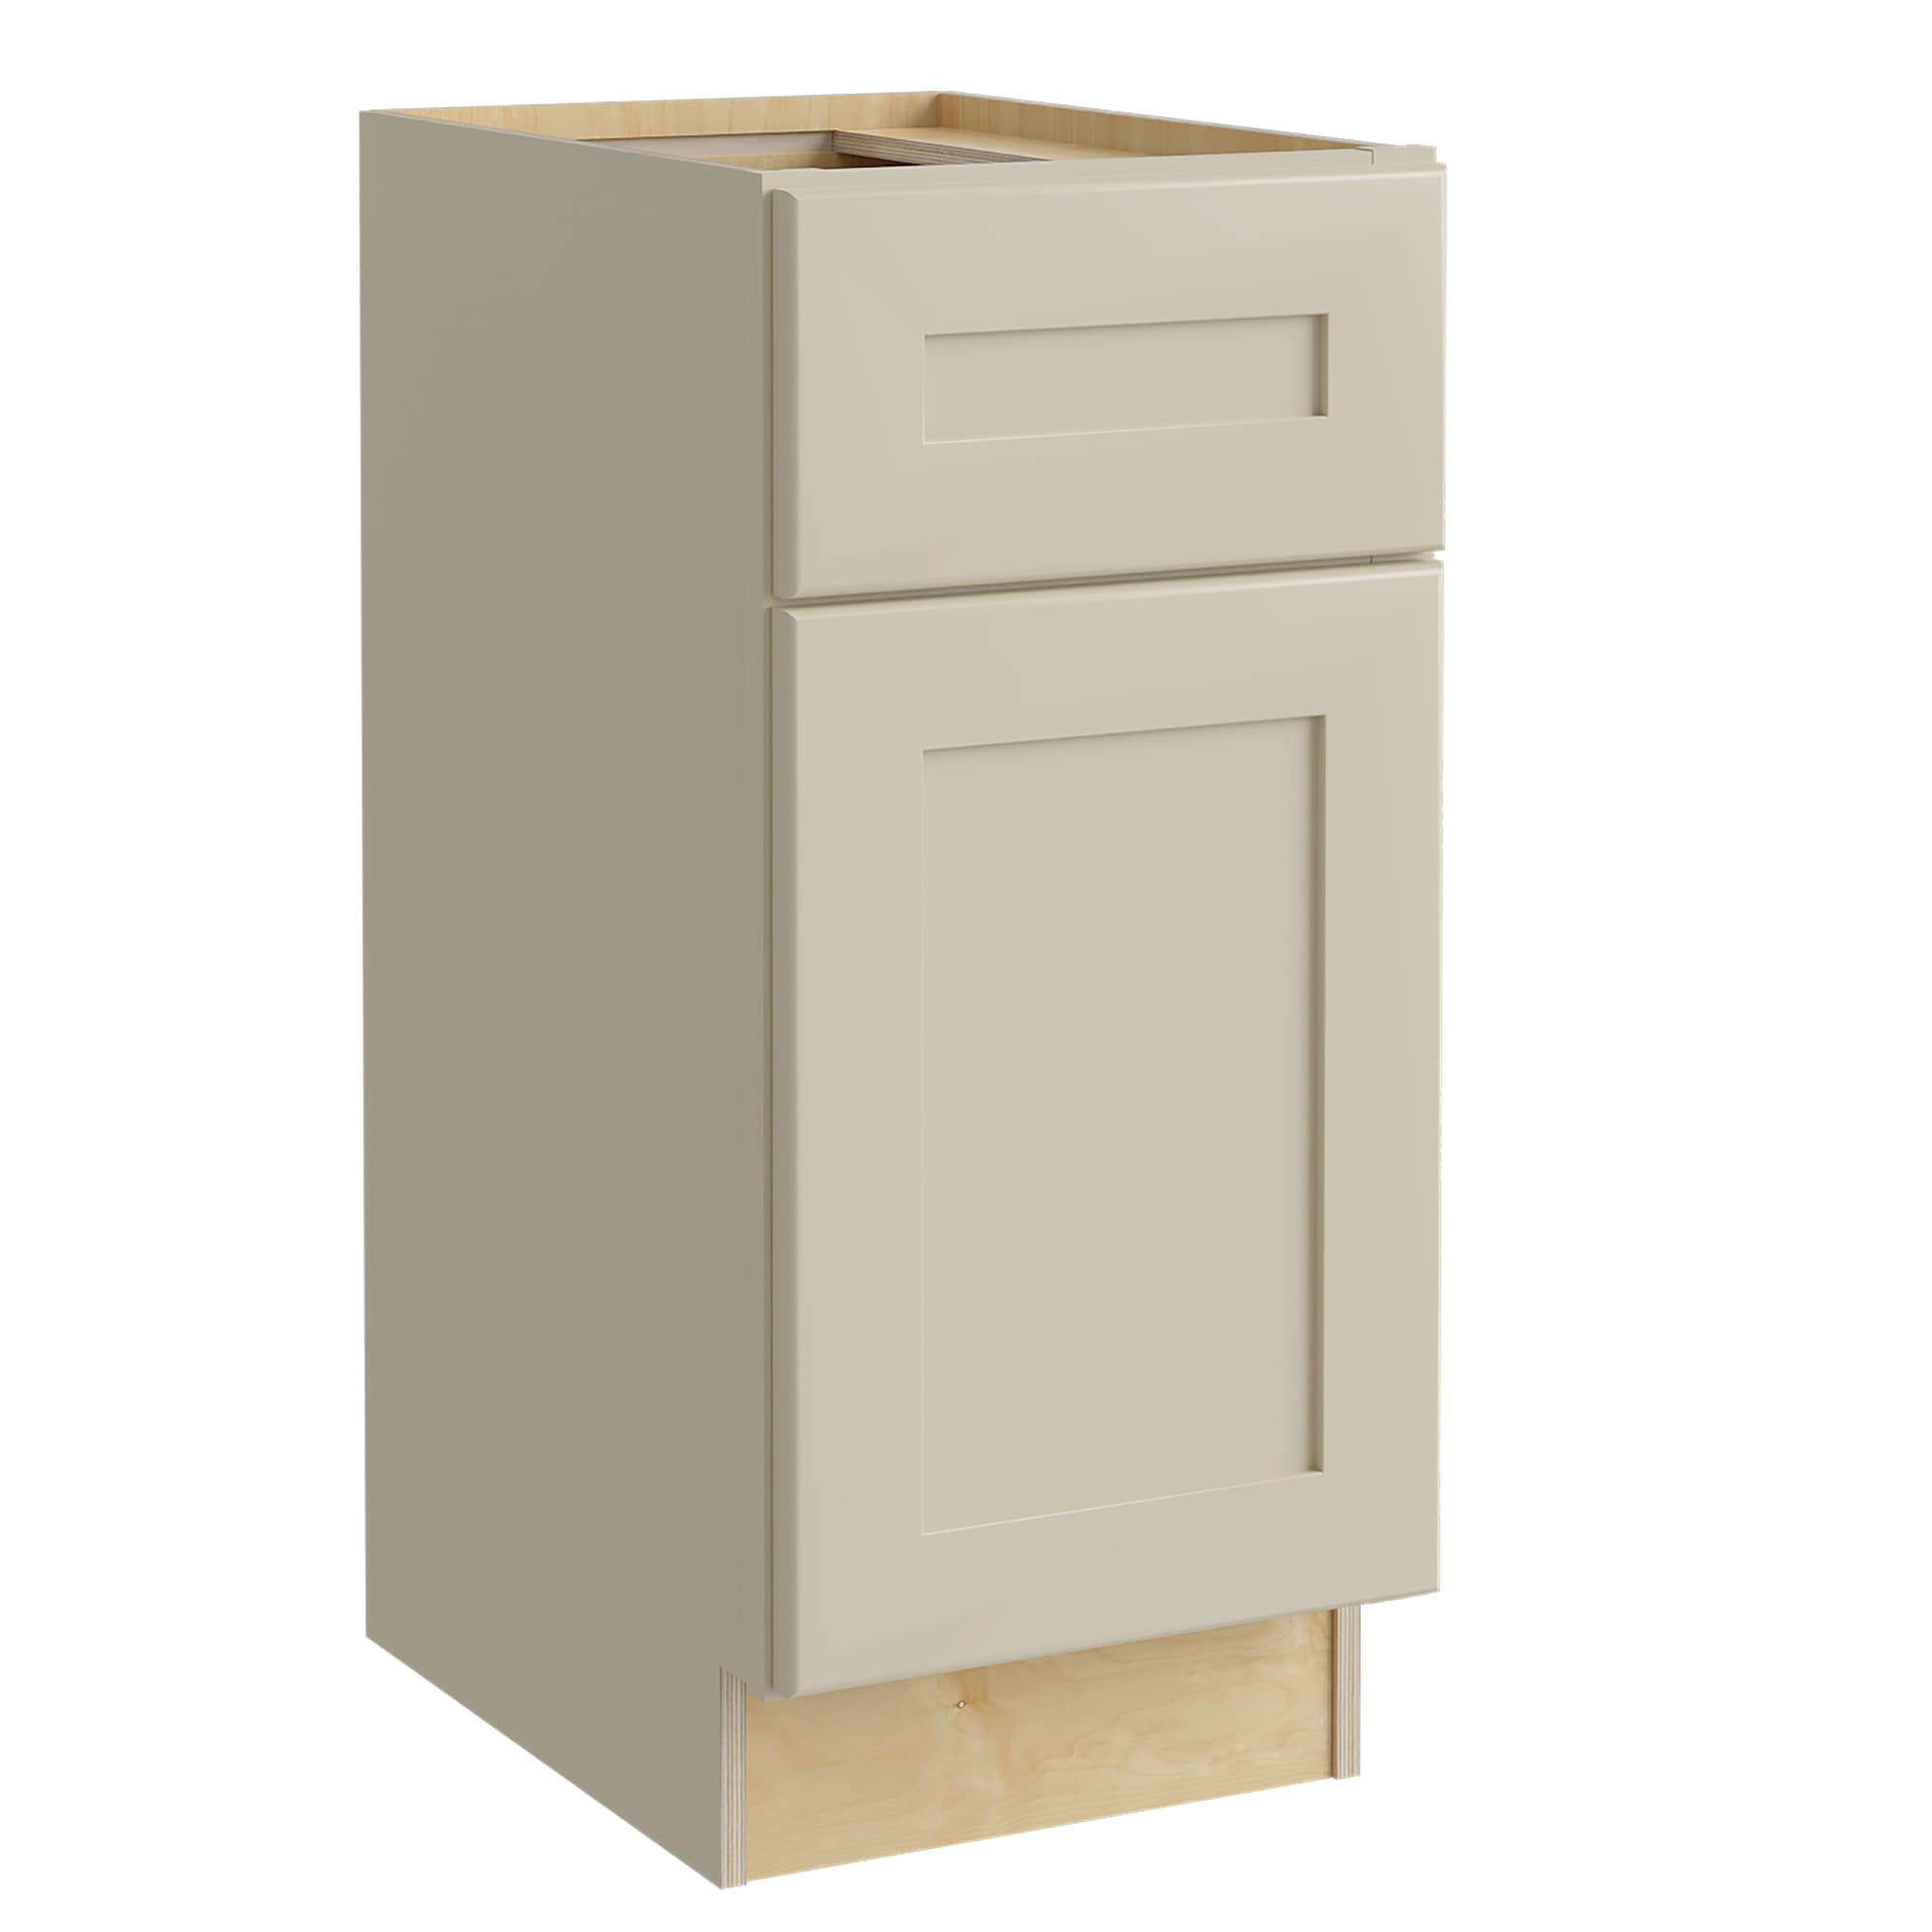 Luxxe Cabinetry 21-in W x 34.5-in H x 21-in D Norfolk Blended Cream Painted Door and Drawer Base Fully Assembled Semi-custom Cabinet in Off-White